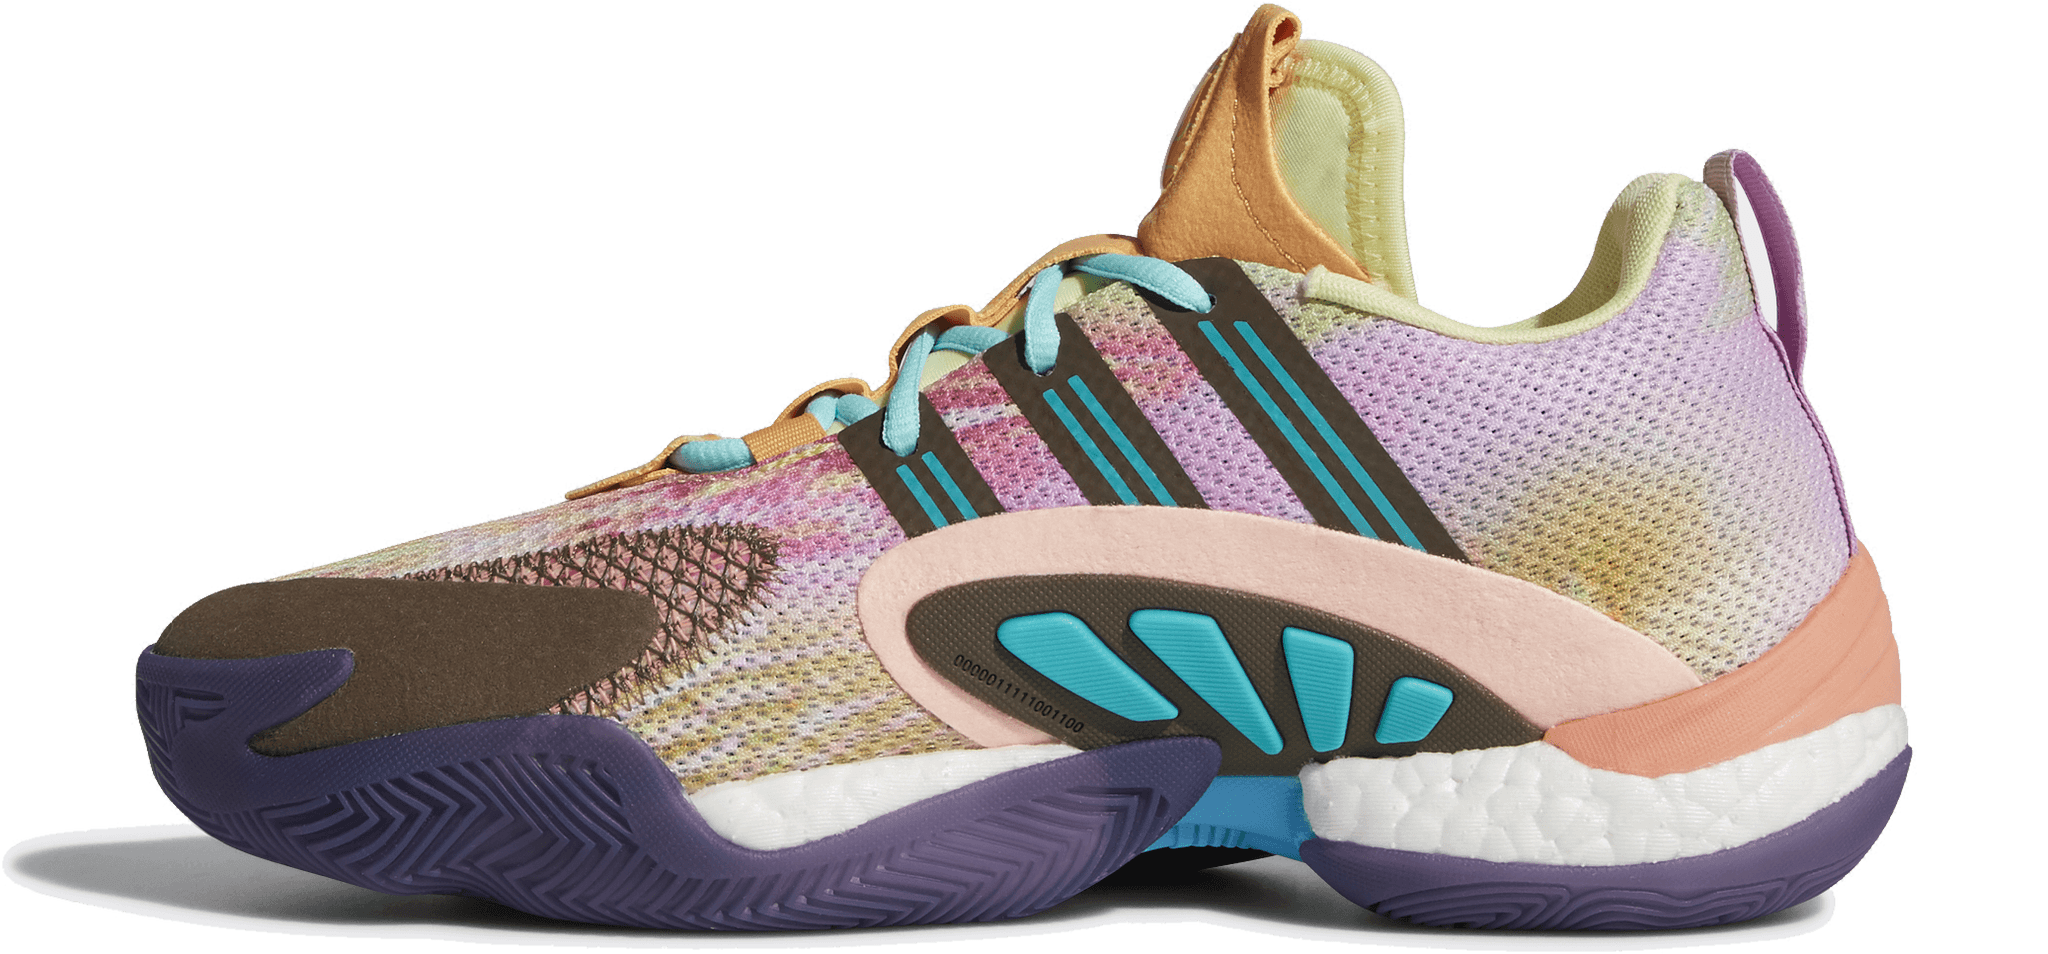 best adidas basketball shoes 2019